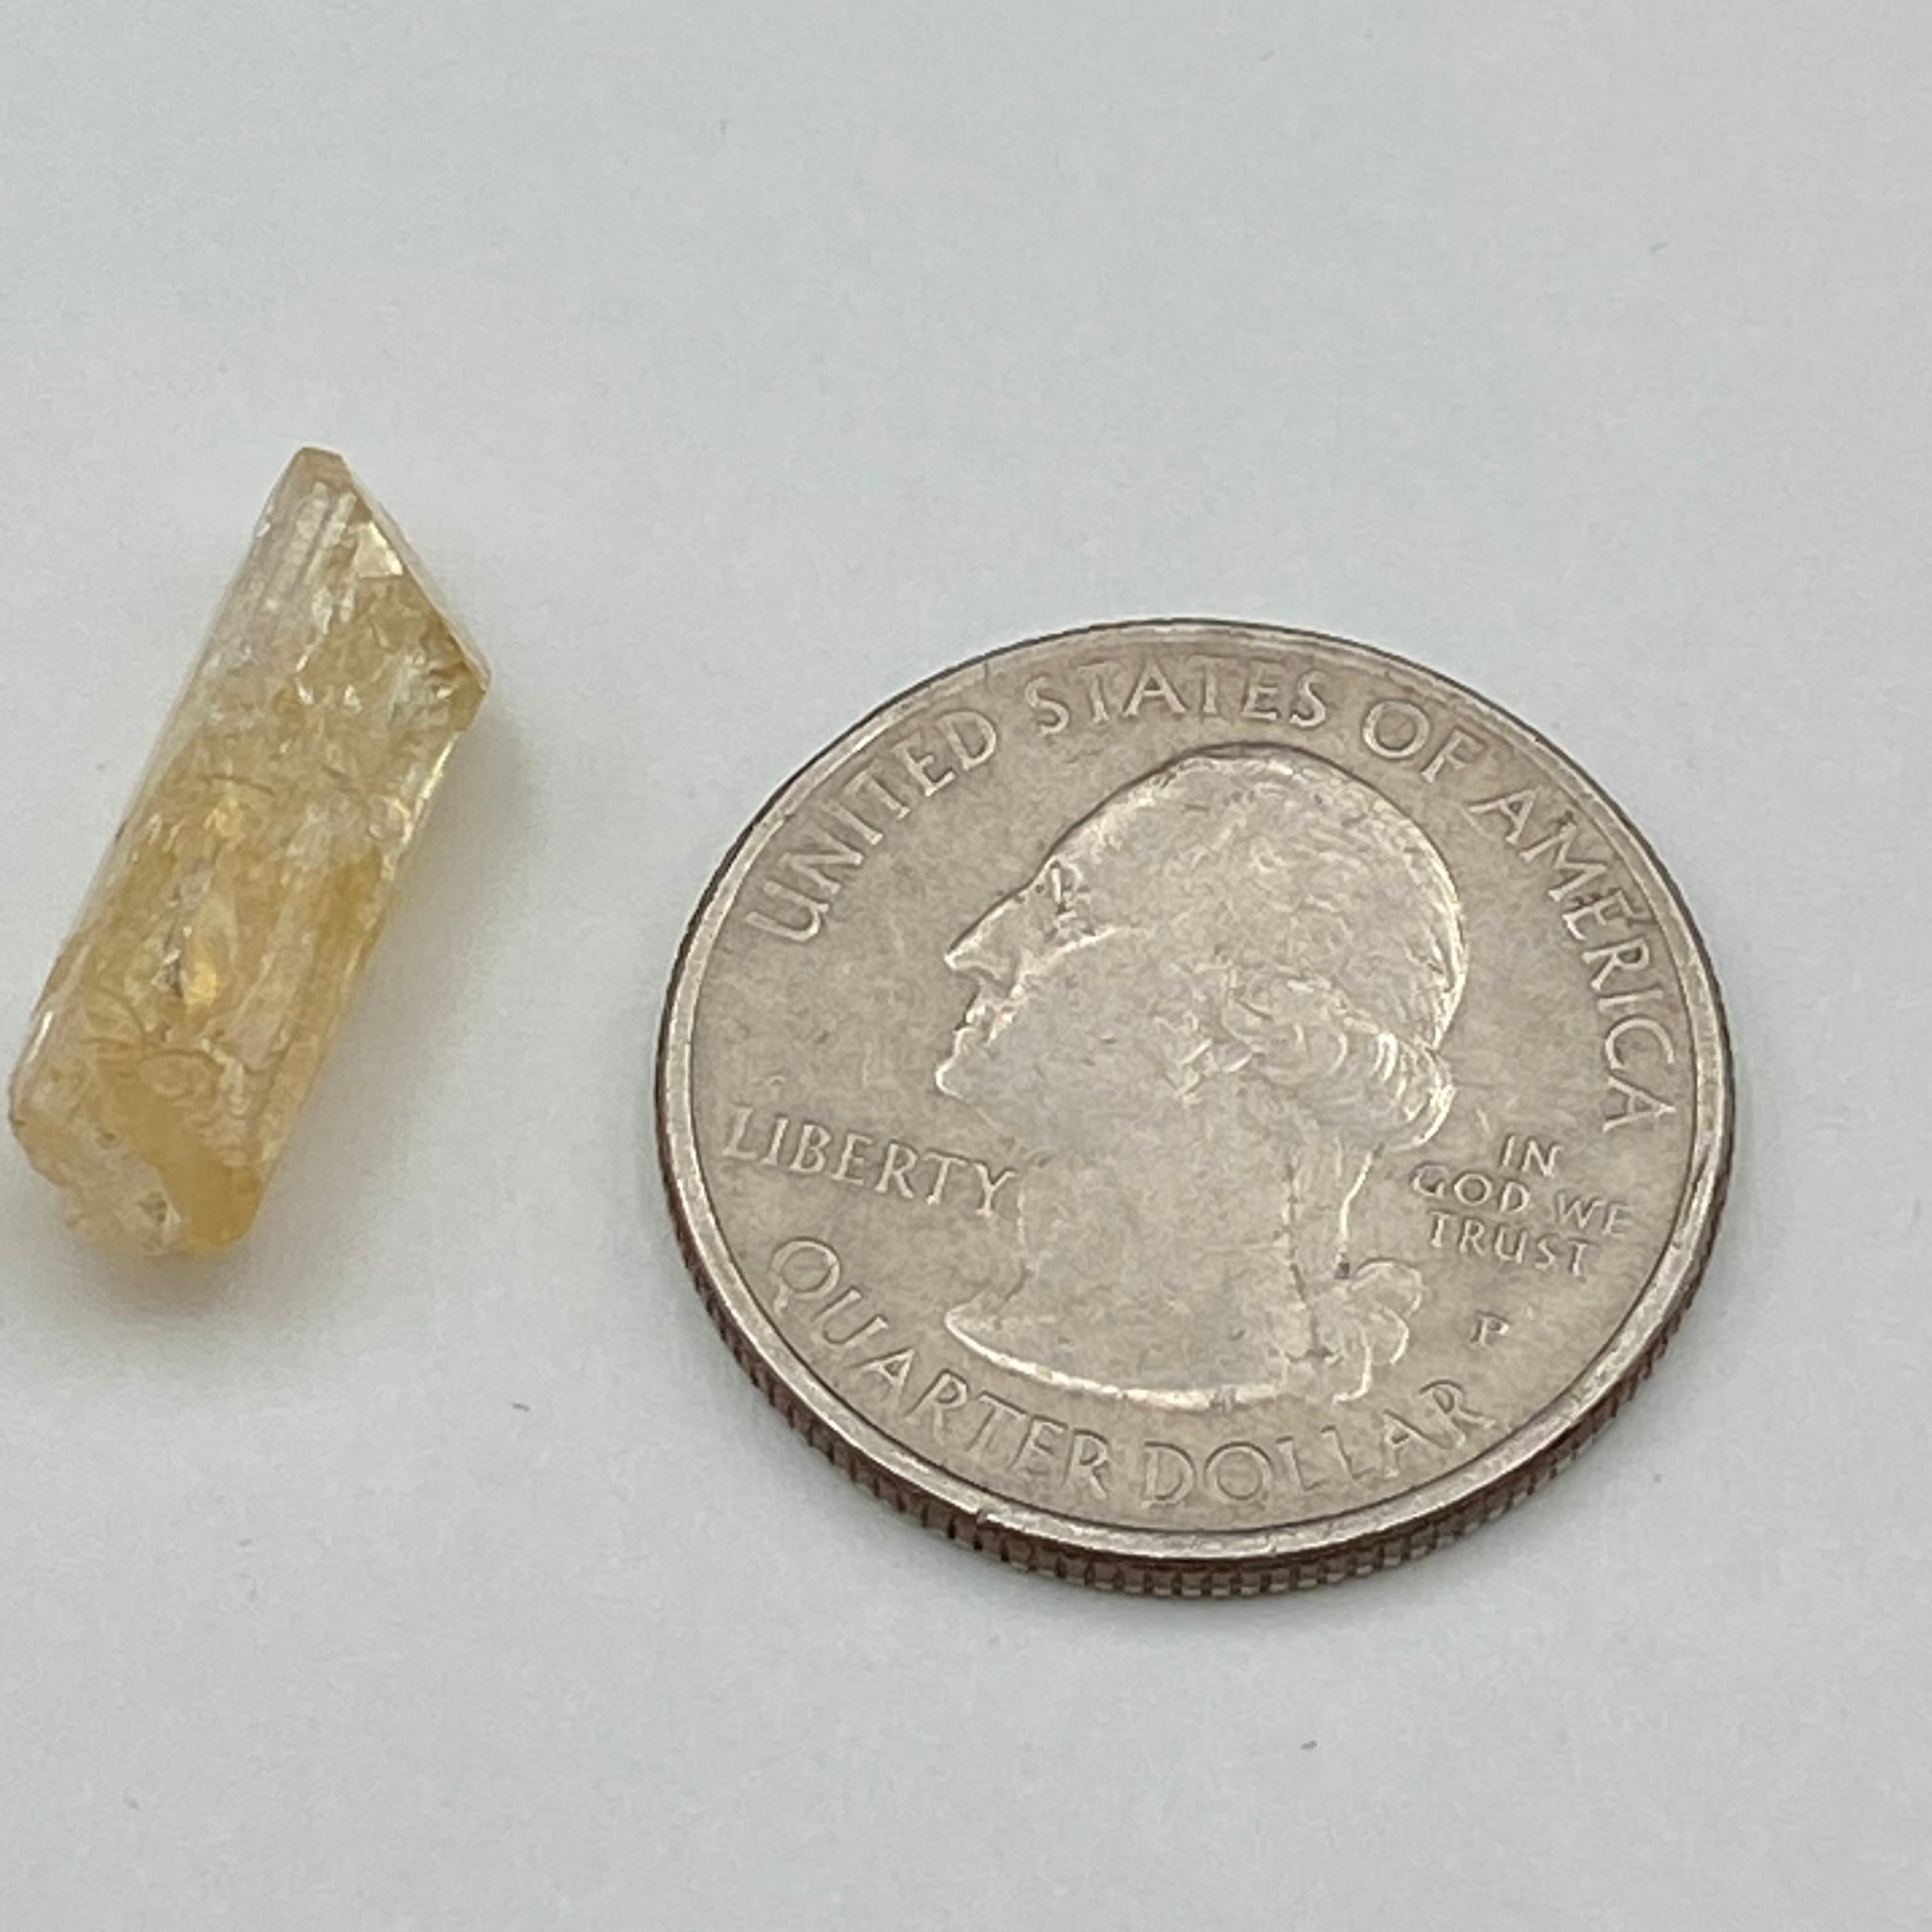 Imperial Topaz Natural Full Terminated Crystal - 185